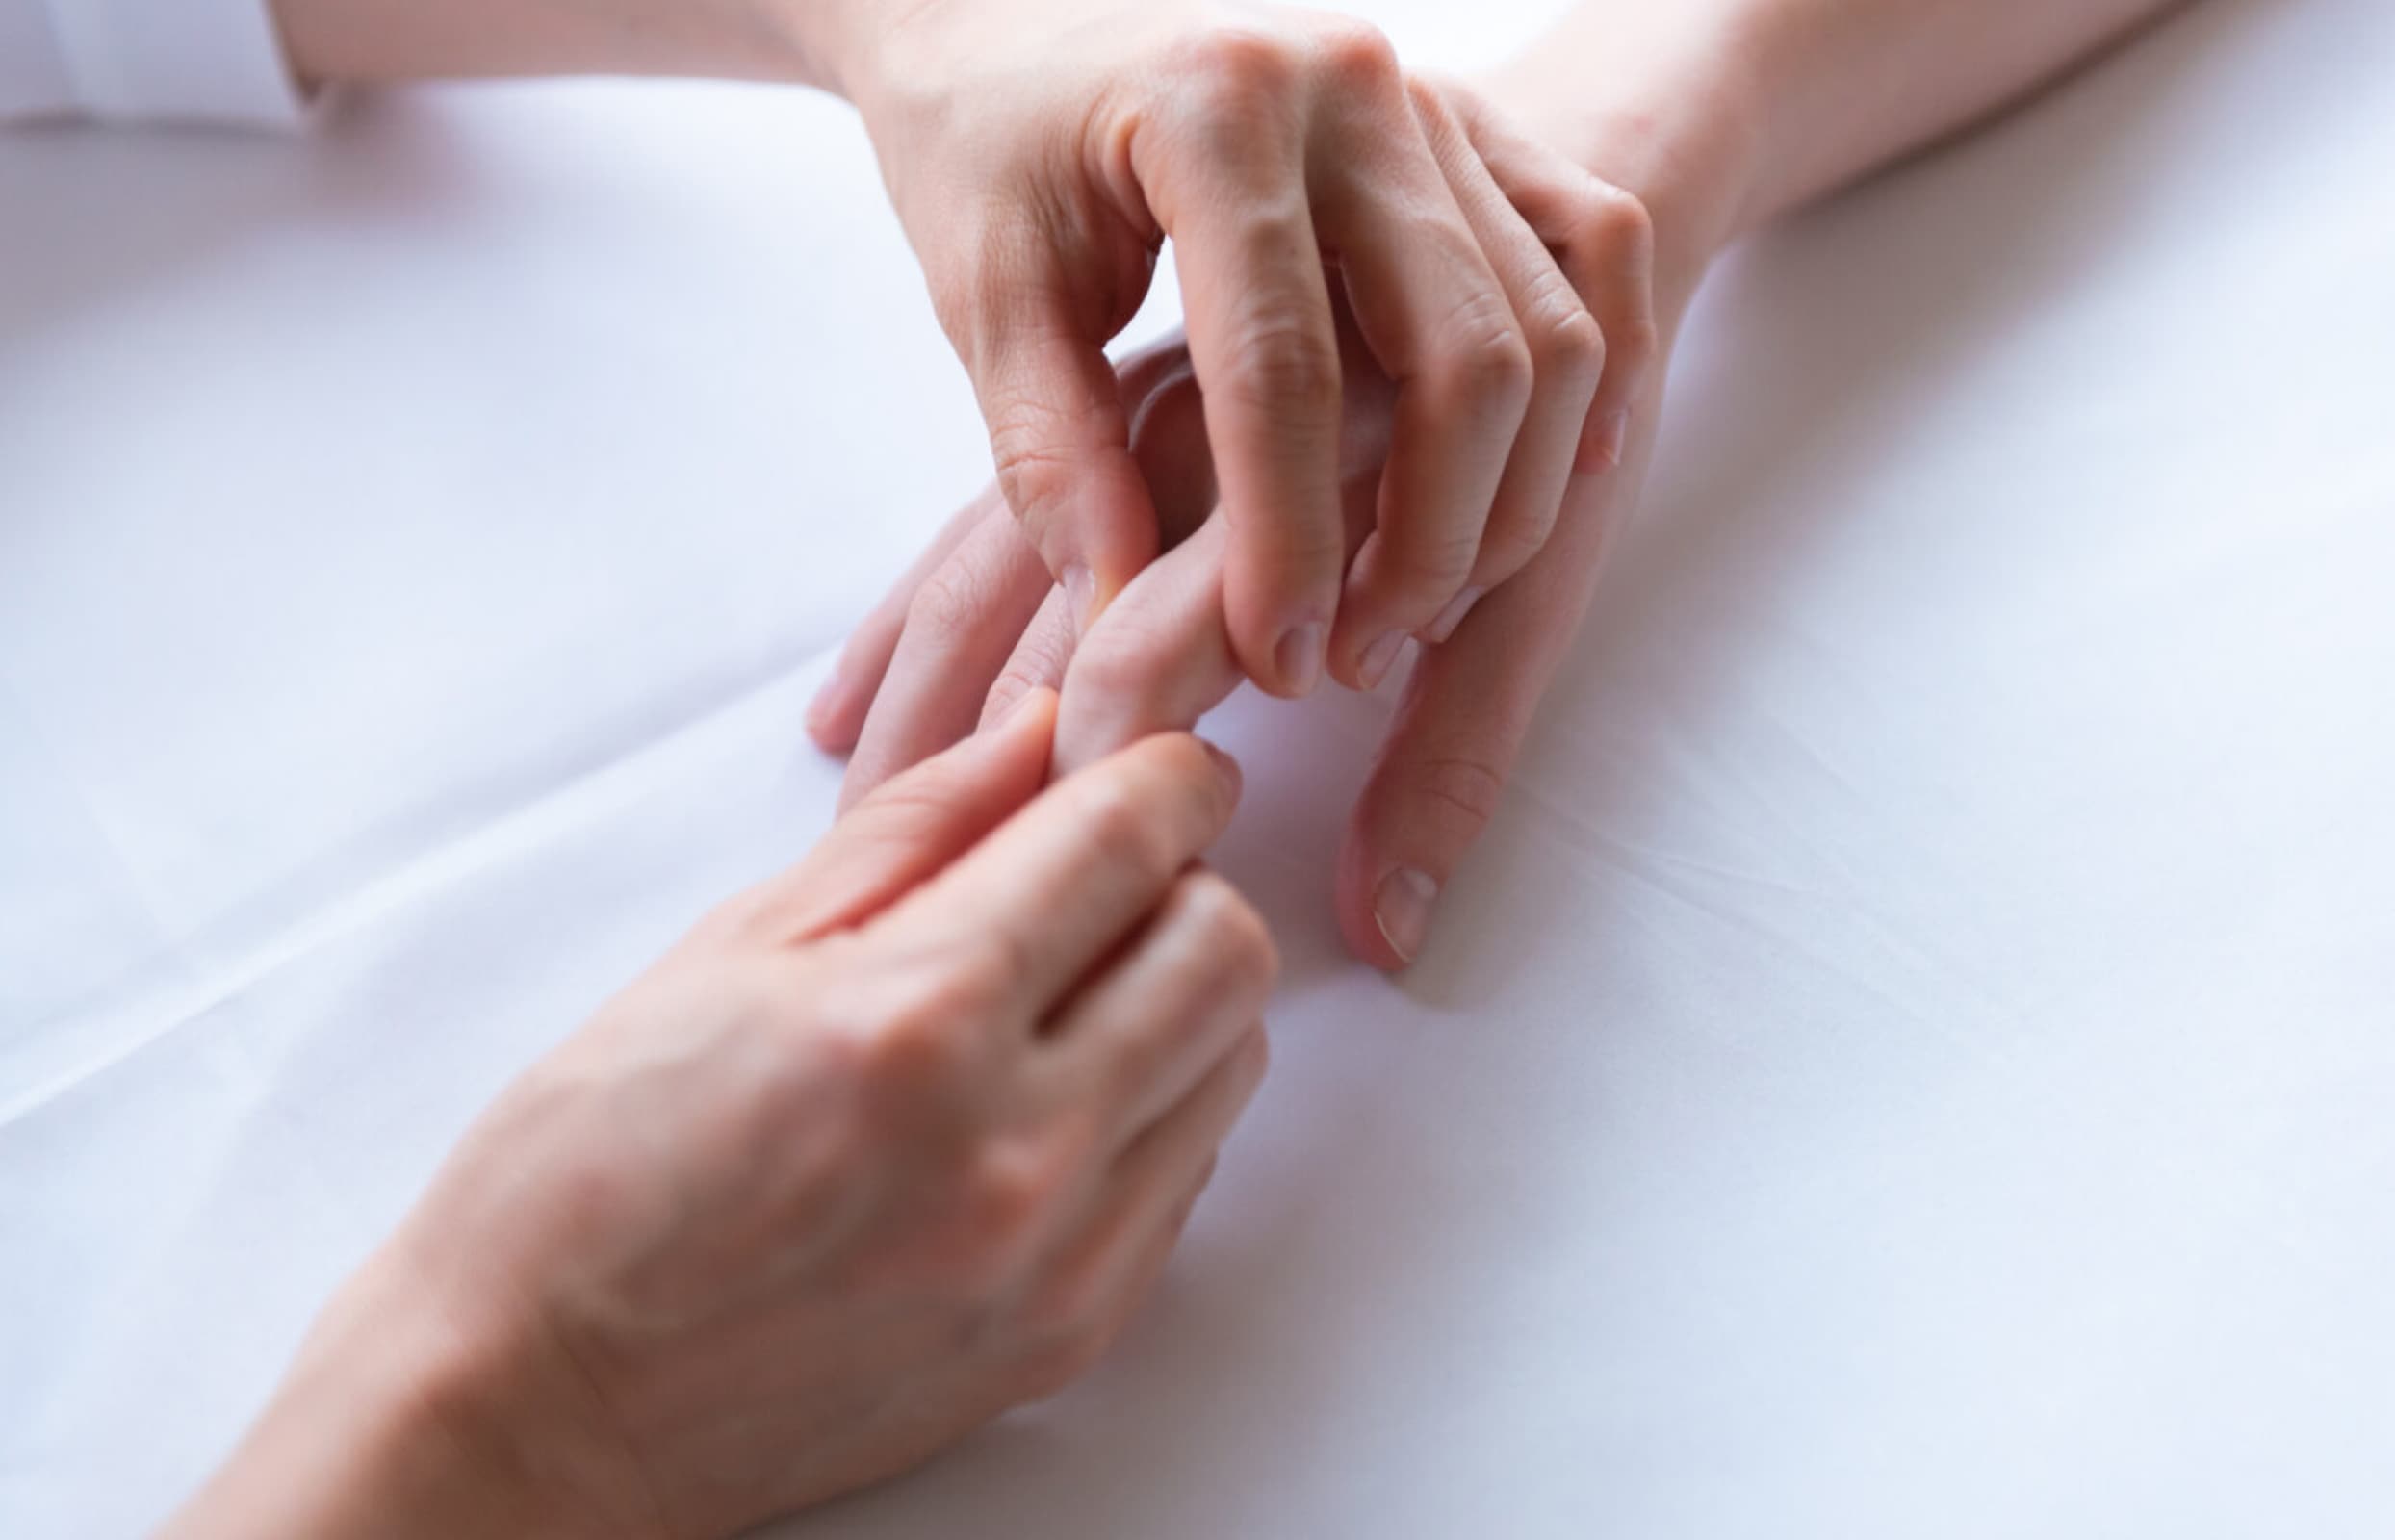 Osteopathic treatment of hands and fingers